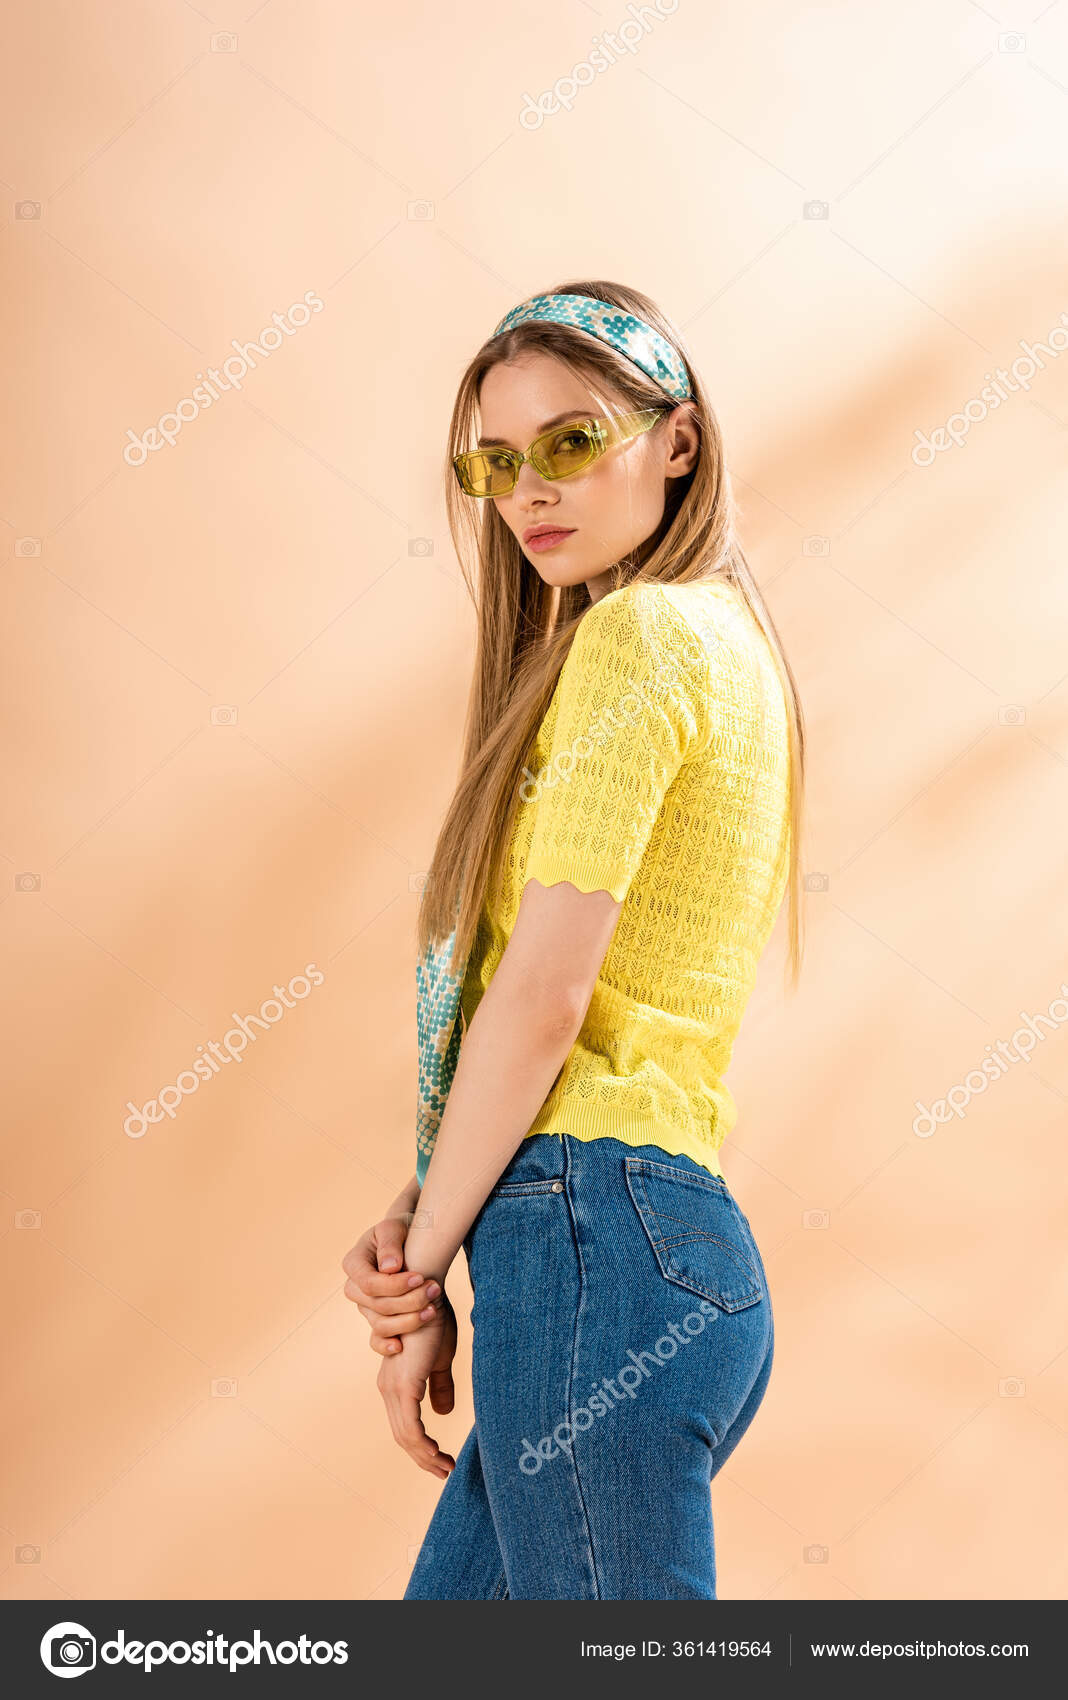 Girls Pose For Photoshoot In Jeans 50 Jeans Top Photoshoot Poses For Girls Posing Tips For 